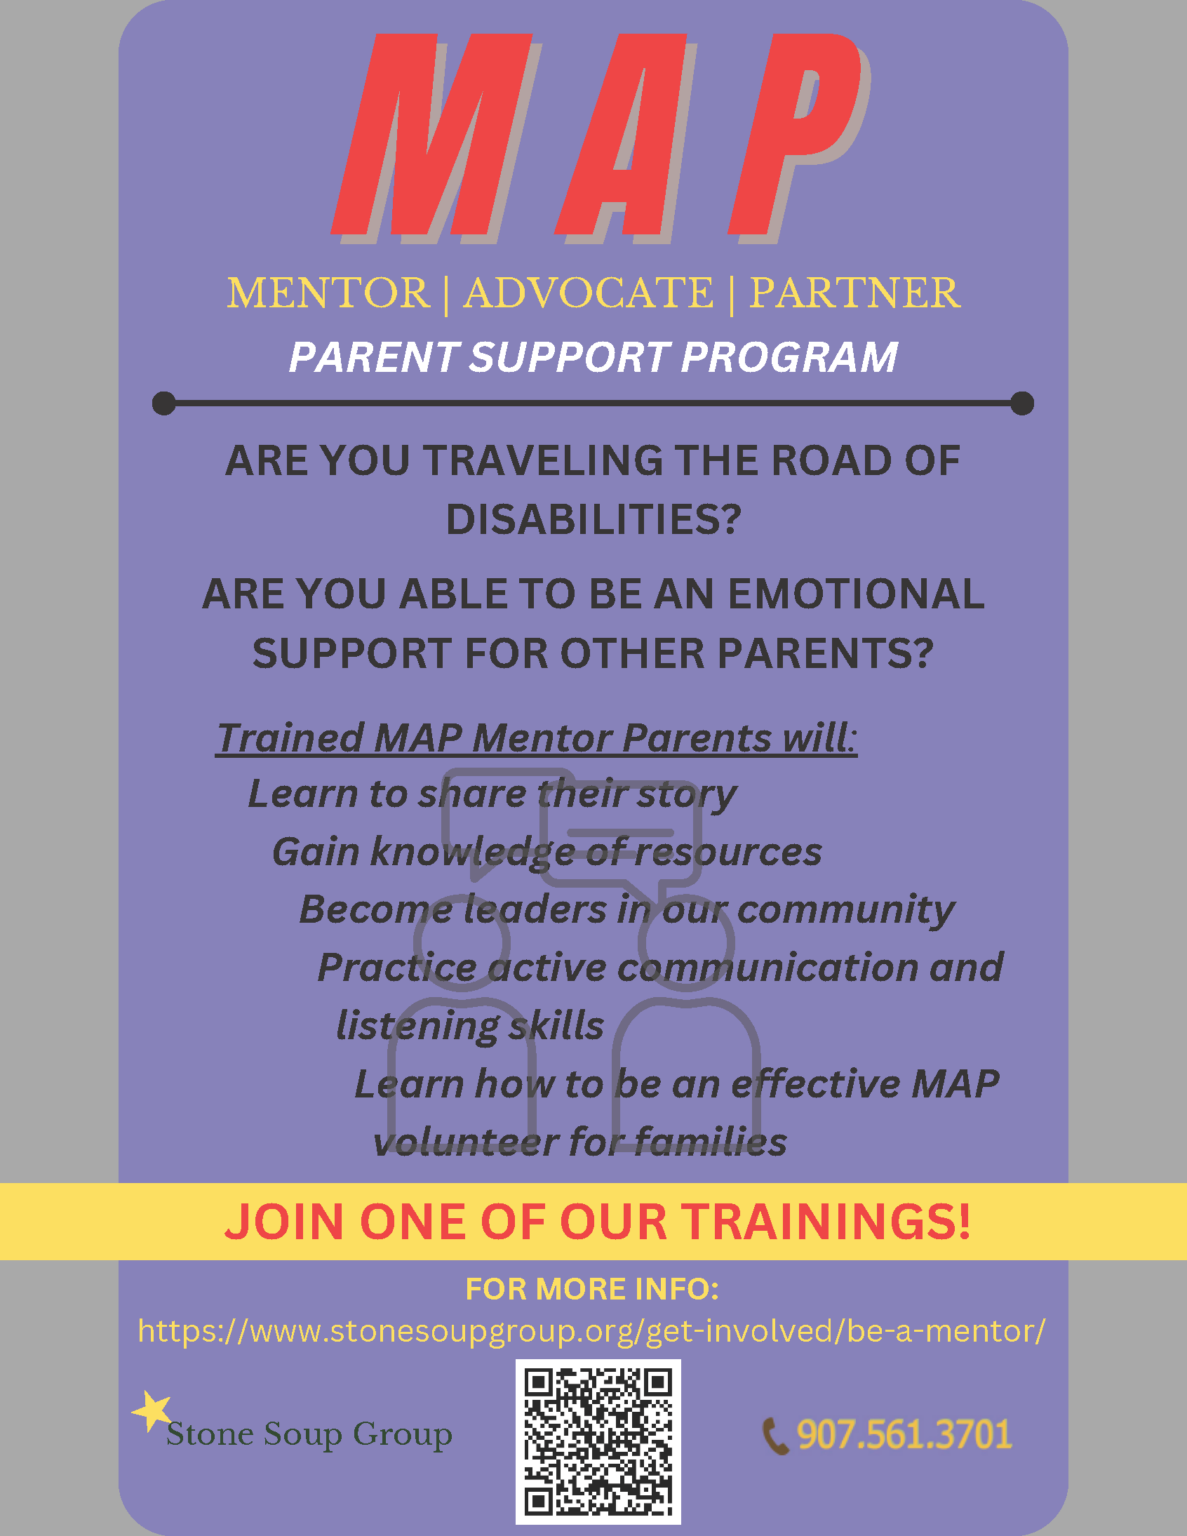 A purple poster that reads "MAP Mentor, advocate, partner Parent support program Are you traveling the road of disabilities? Are you able to be an emotional support for other parents? Trained MAP Mentor Parents will: Learn to share their story Gain knowledge of resources Become leaders in our community Practice active communication and listening skills Learn how to be an effective MAP volunteer for families Join one of our trainings! For more info: https://www.stonesoupgroup.org/get-involved/be-a-mentor/ 907.561.3701"